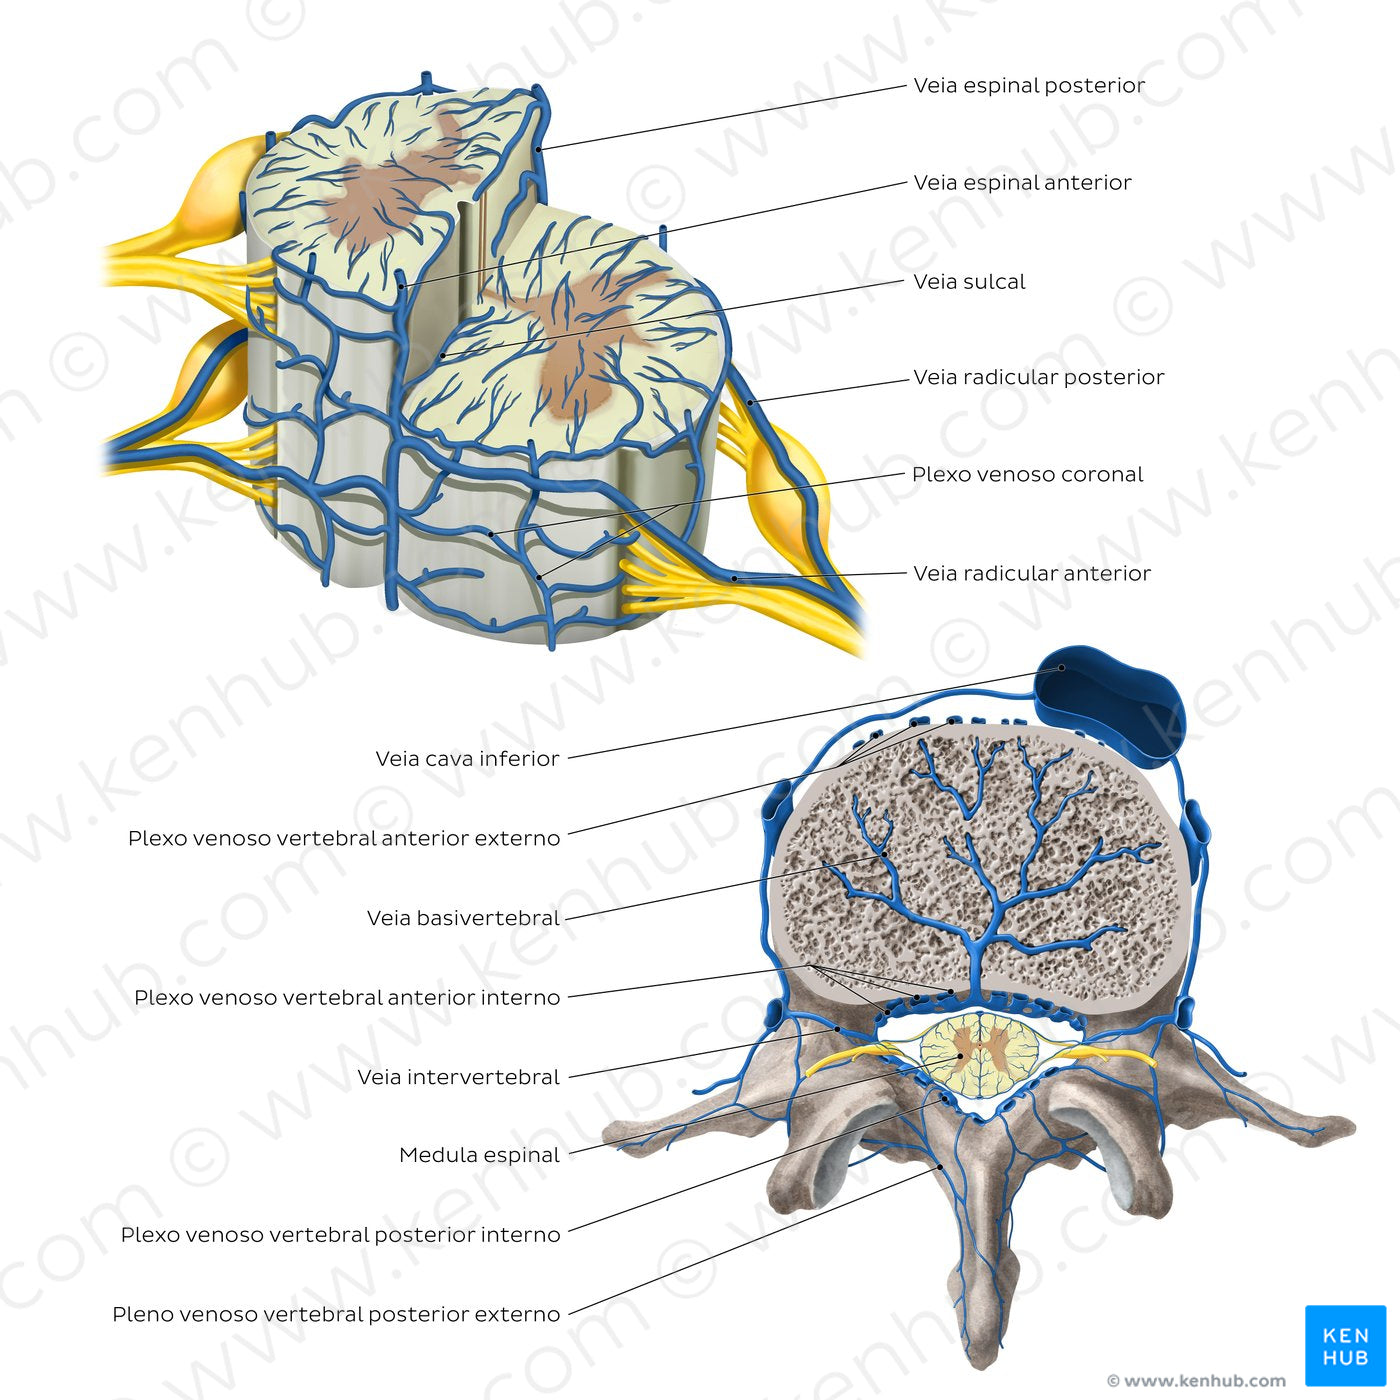 Veins of the spinal cord (Portuguese)